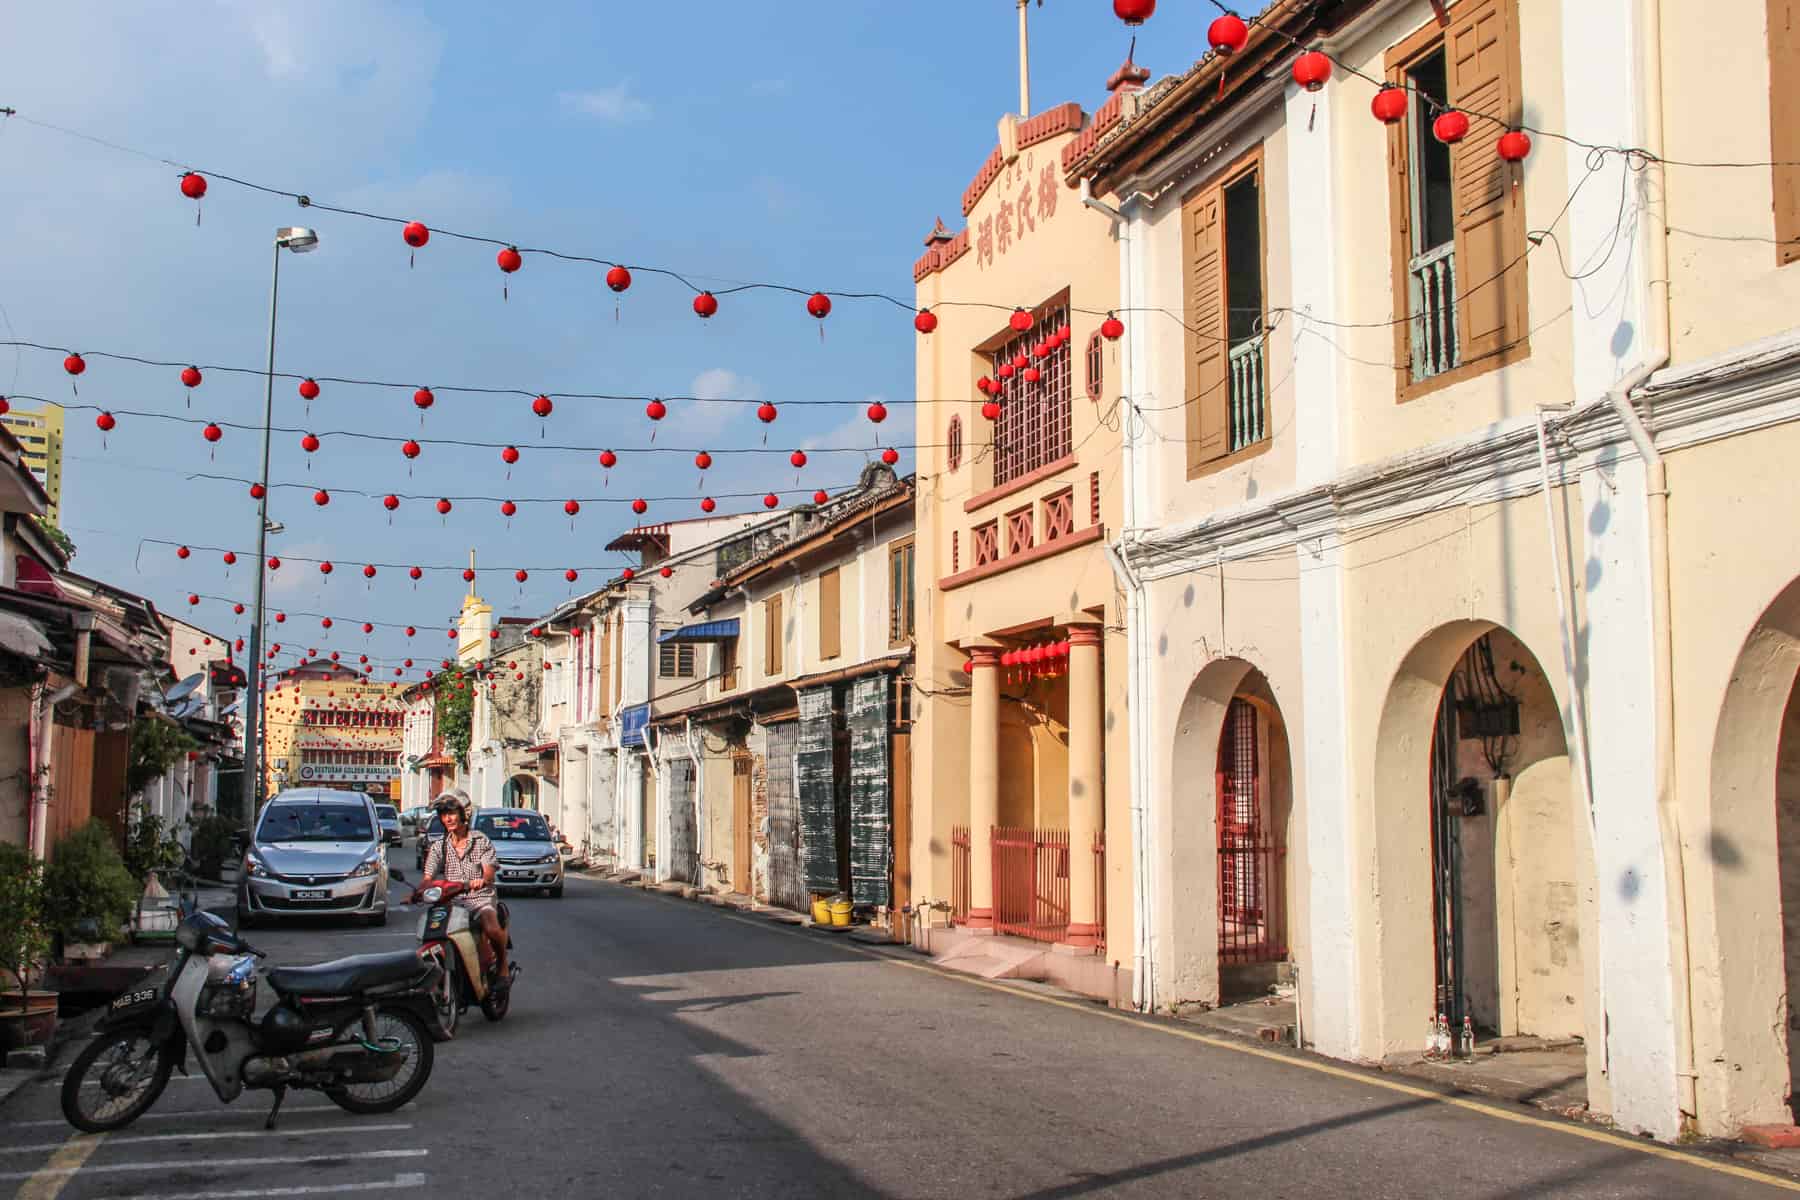 The beige colonial buildings in Melaka, shown in this typical street of beige structures